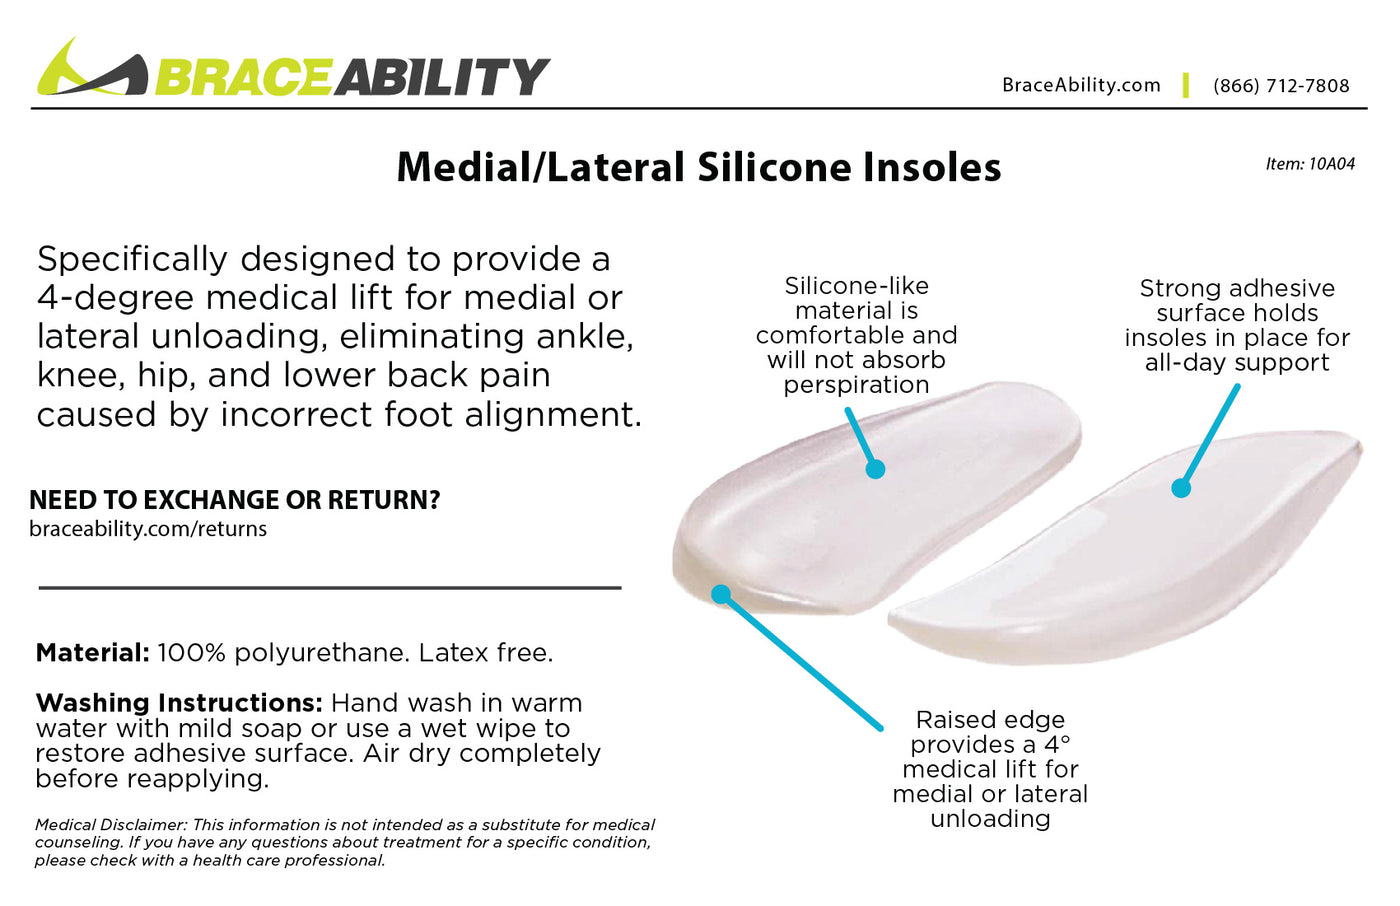 to clean the medial or lateral silicone insoles, hand wash them in warm water and let them air dry